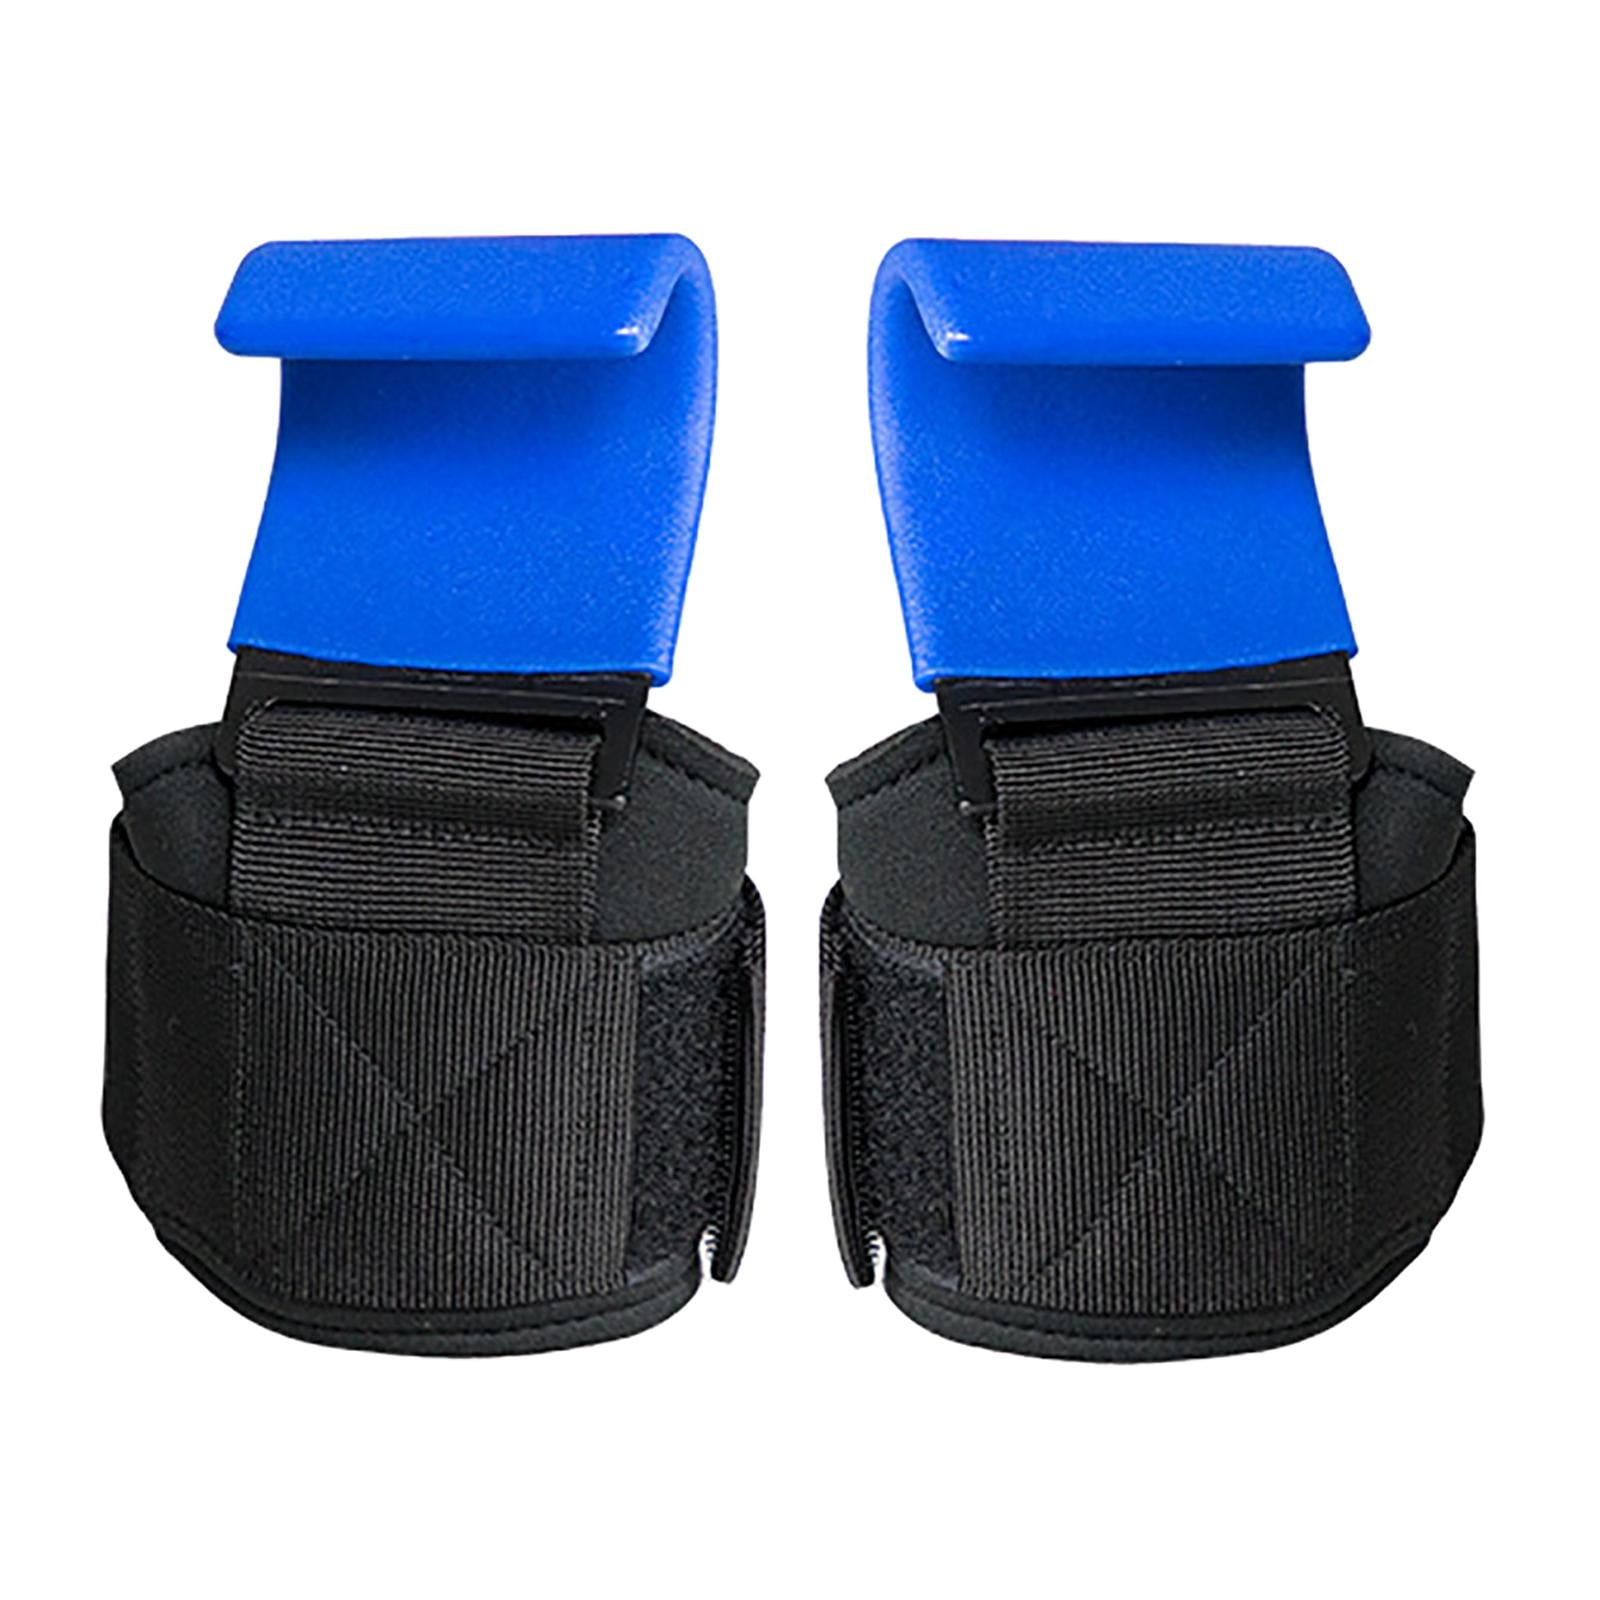 Blue Colour Power Weight Lifting Training Gym Straps Hook bar Wrist Support 